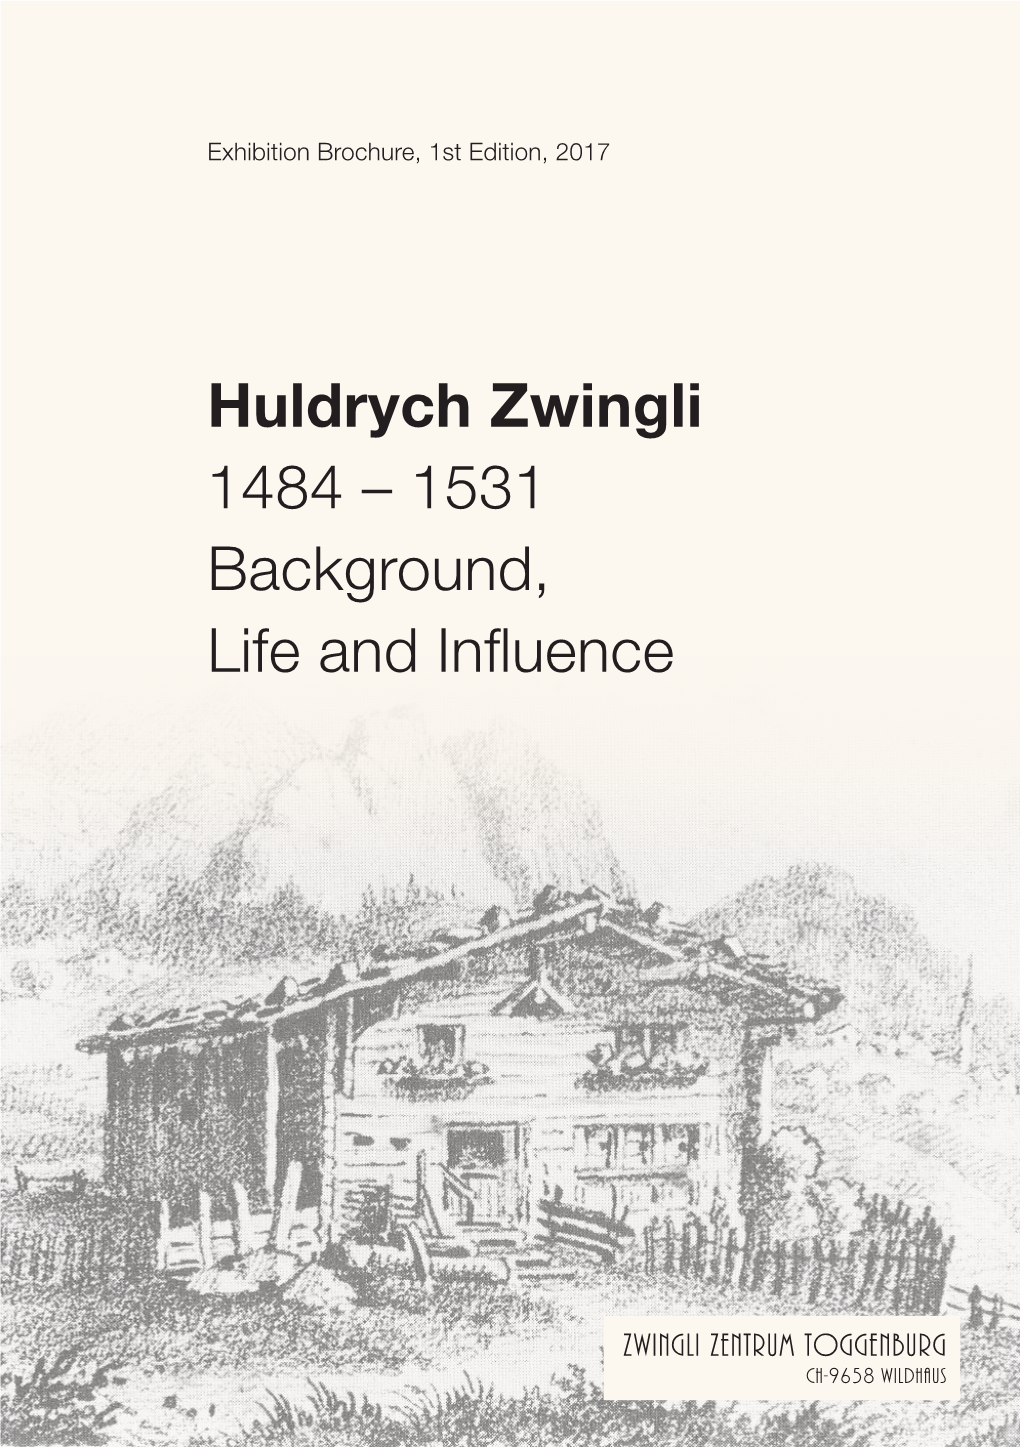 Huldrych Zwingli 1484 – 1531 Background, Life and Influence Contents